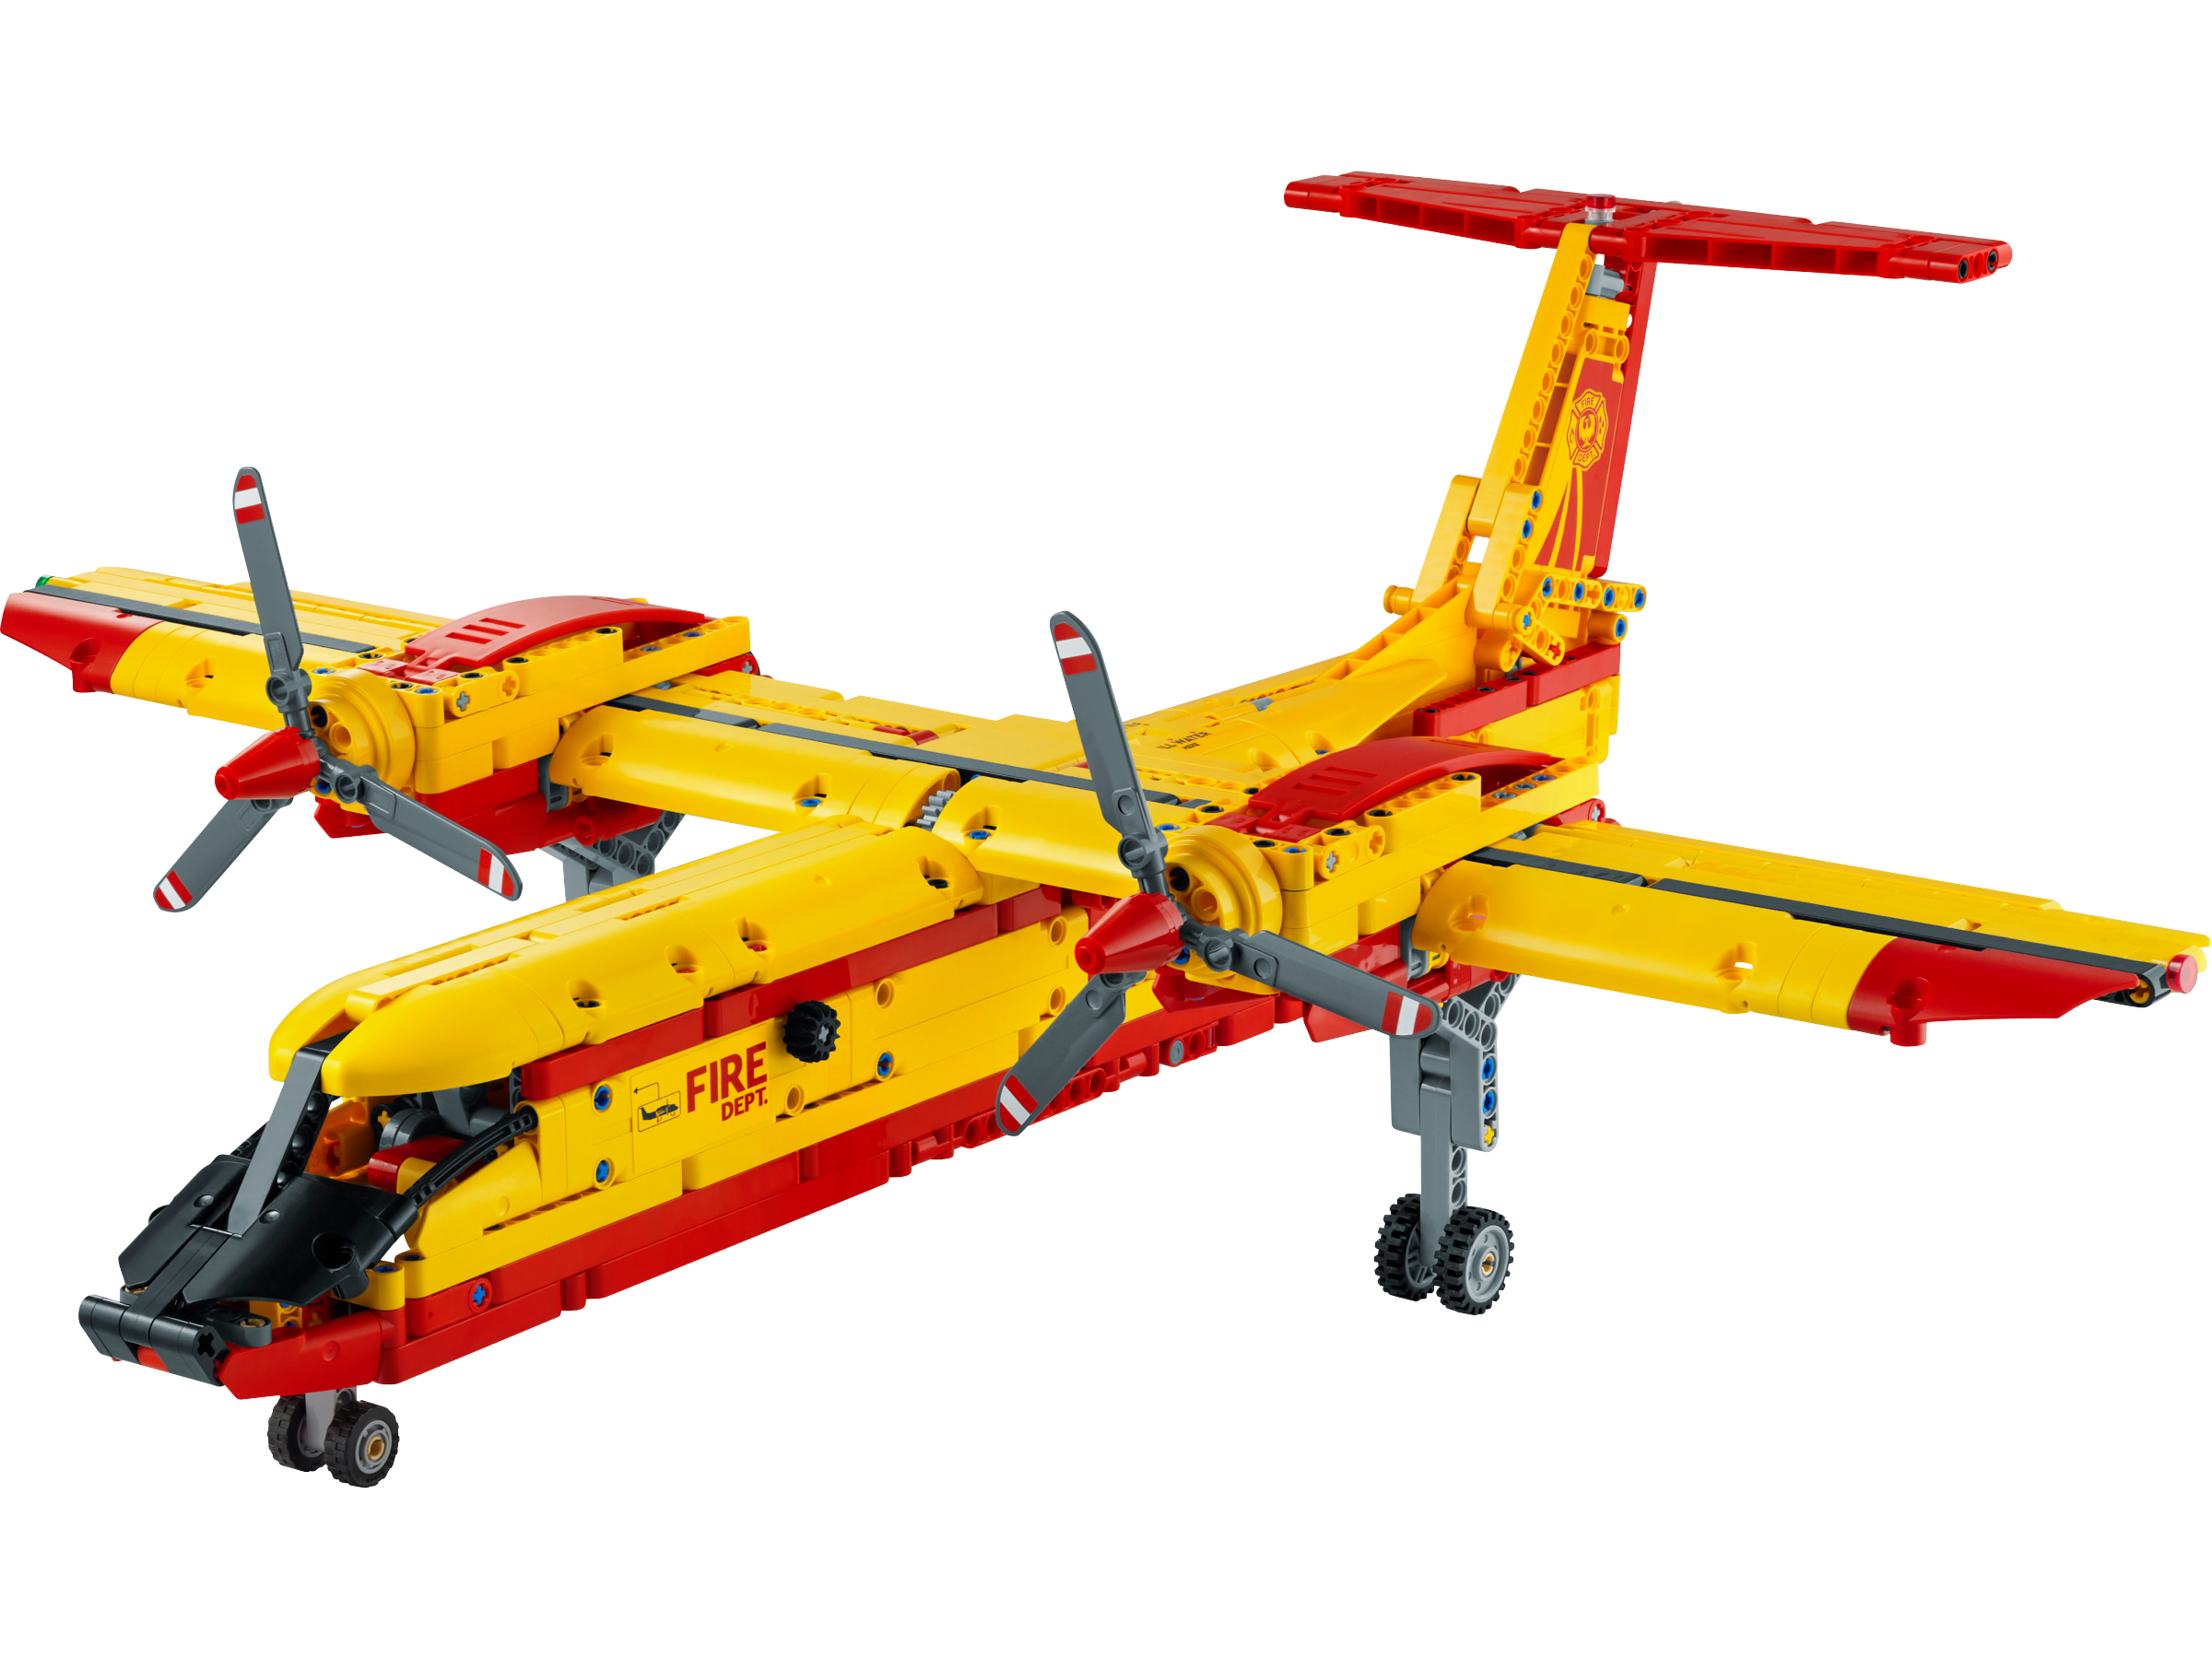 Firefighter Aircraft 42152 | Technic™ | online at Official LEGO® Shop US